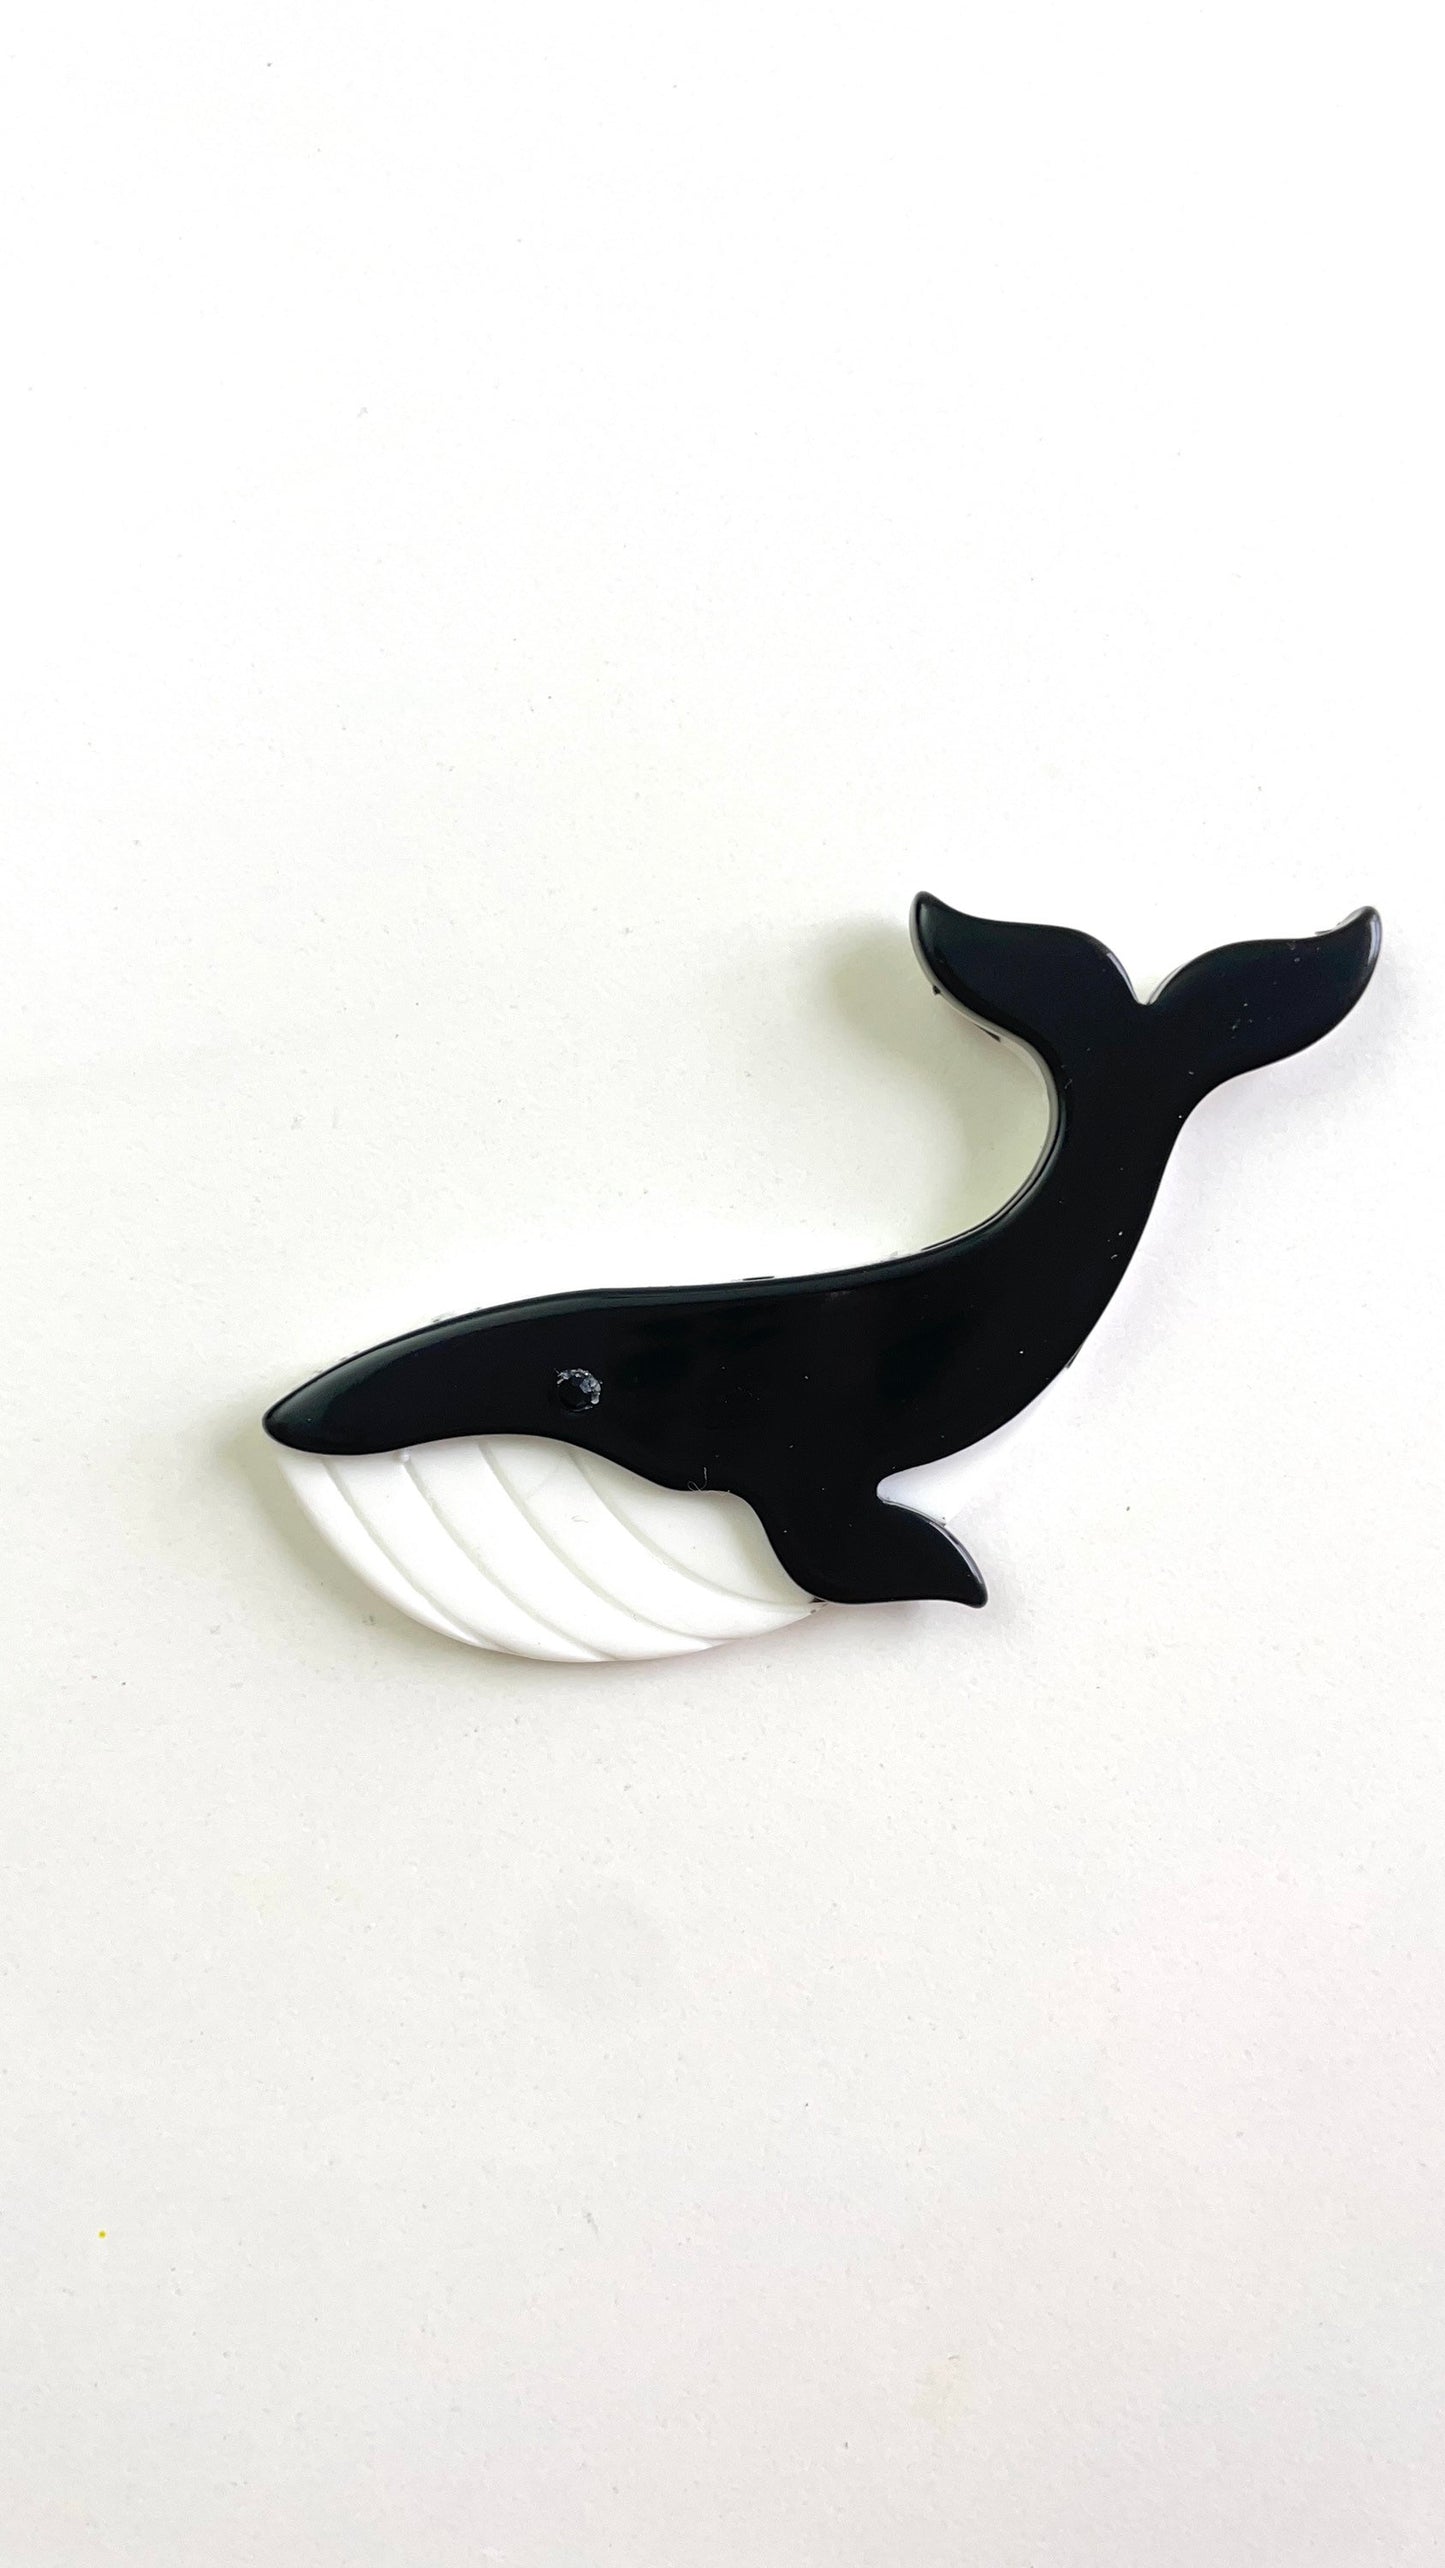 Sea Whale Silicone Mold: Epoxy Resin, Marine, Jewelry, and Clay Molding